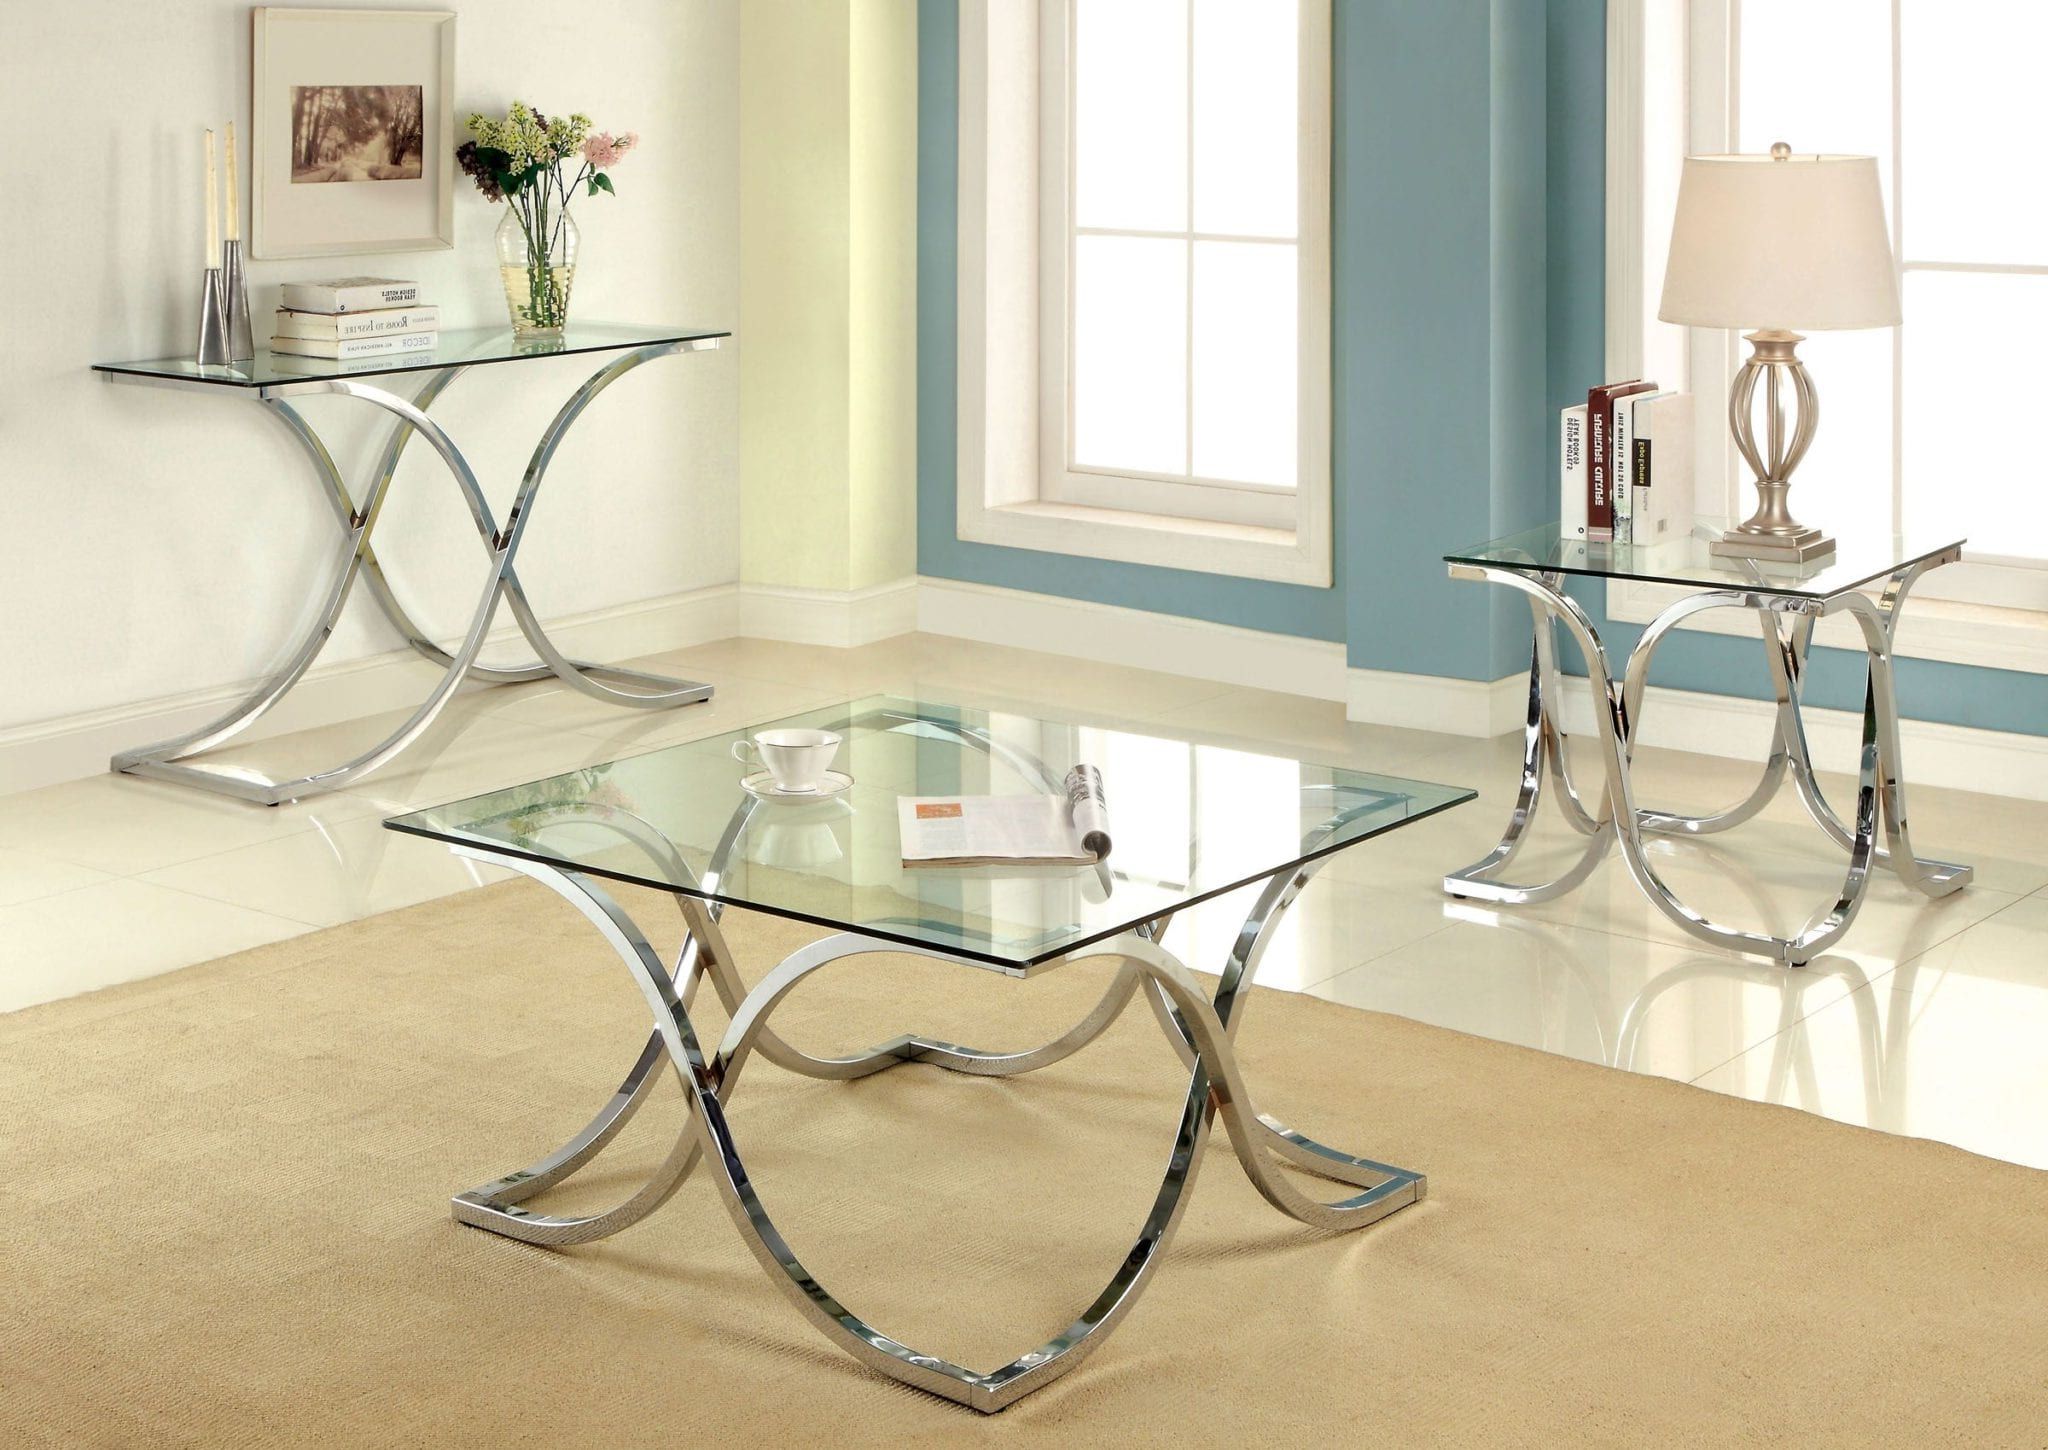 2018 Cm4233 3 Pieces Contemporary Chrome Mirror Top Coffee Within Mirrored And Chrome Modern Cocktail Tables (View 9 of 20)